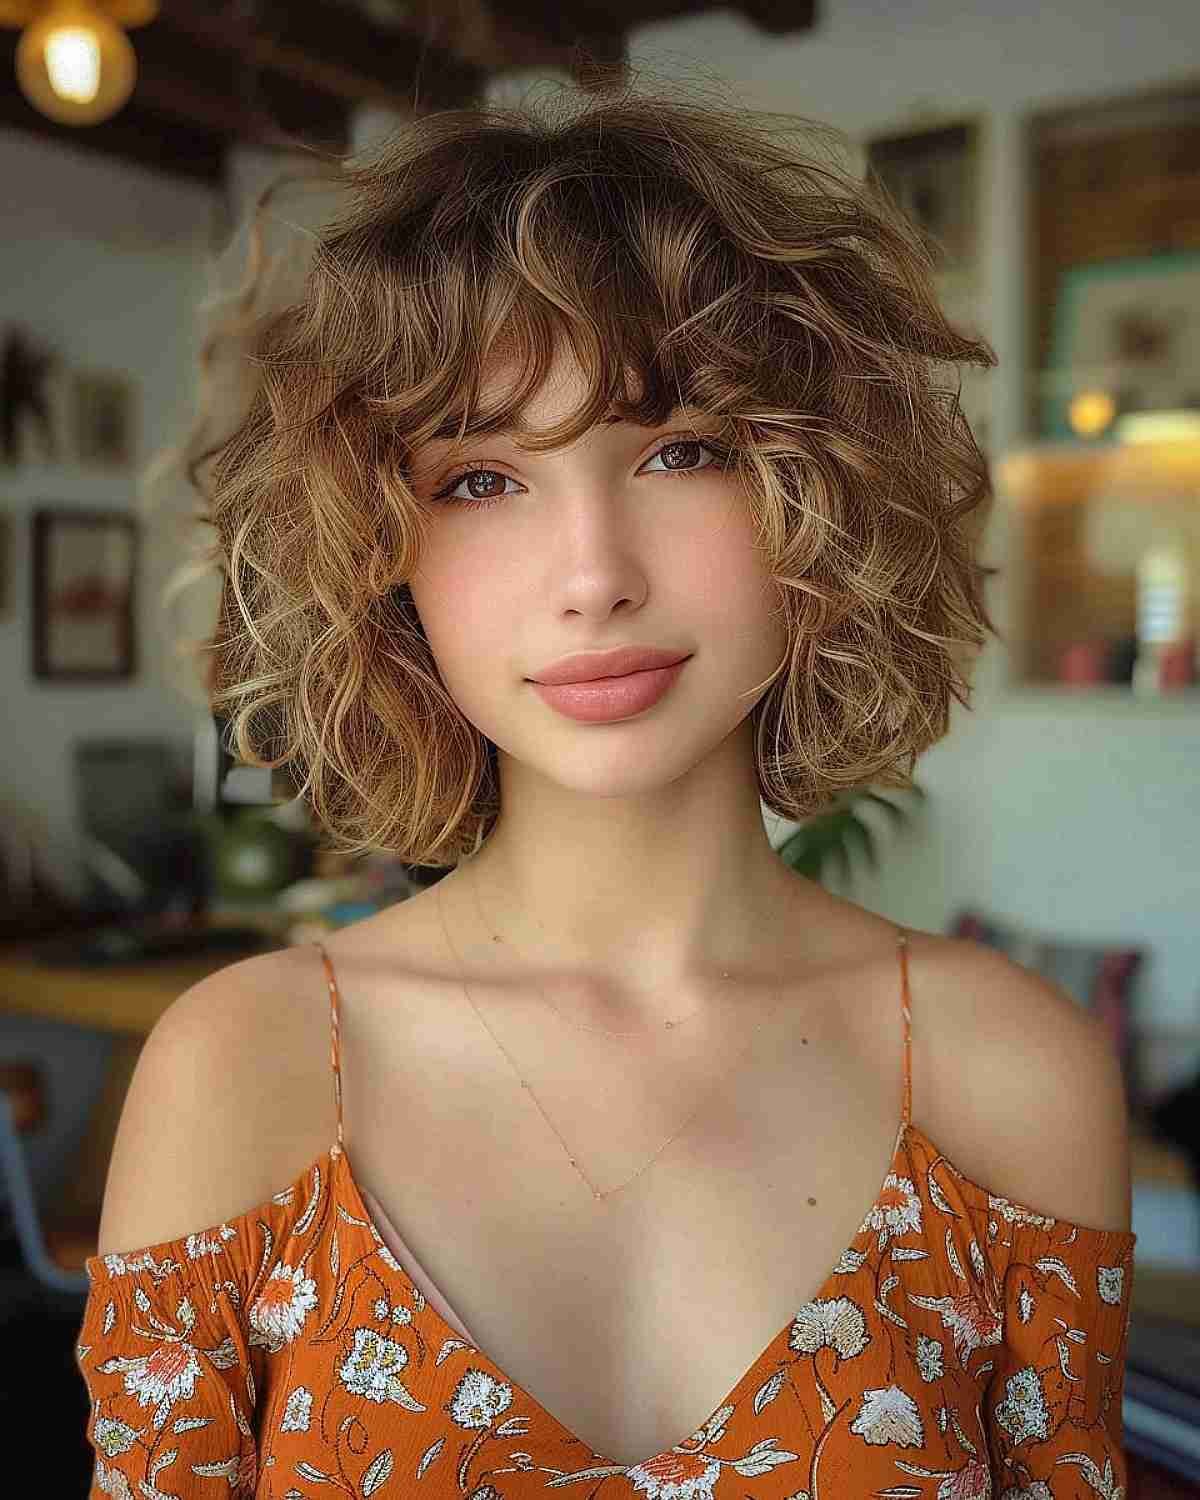 Playful Curly Bob with Bangs for Day Out